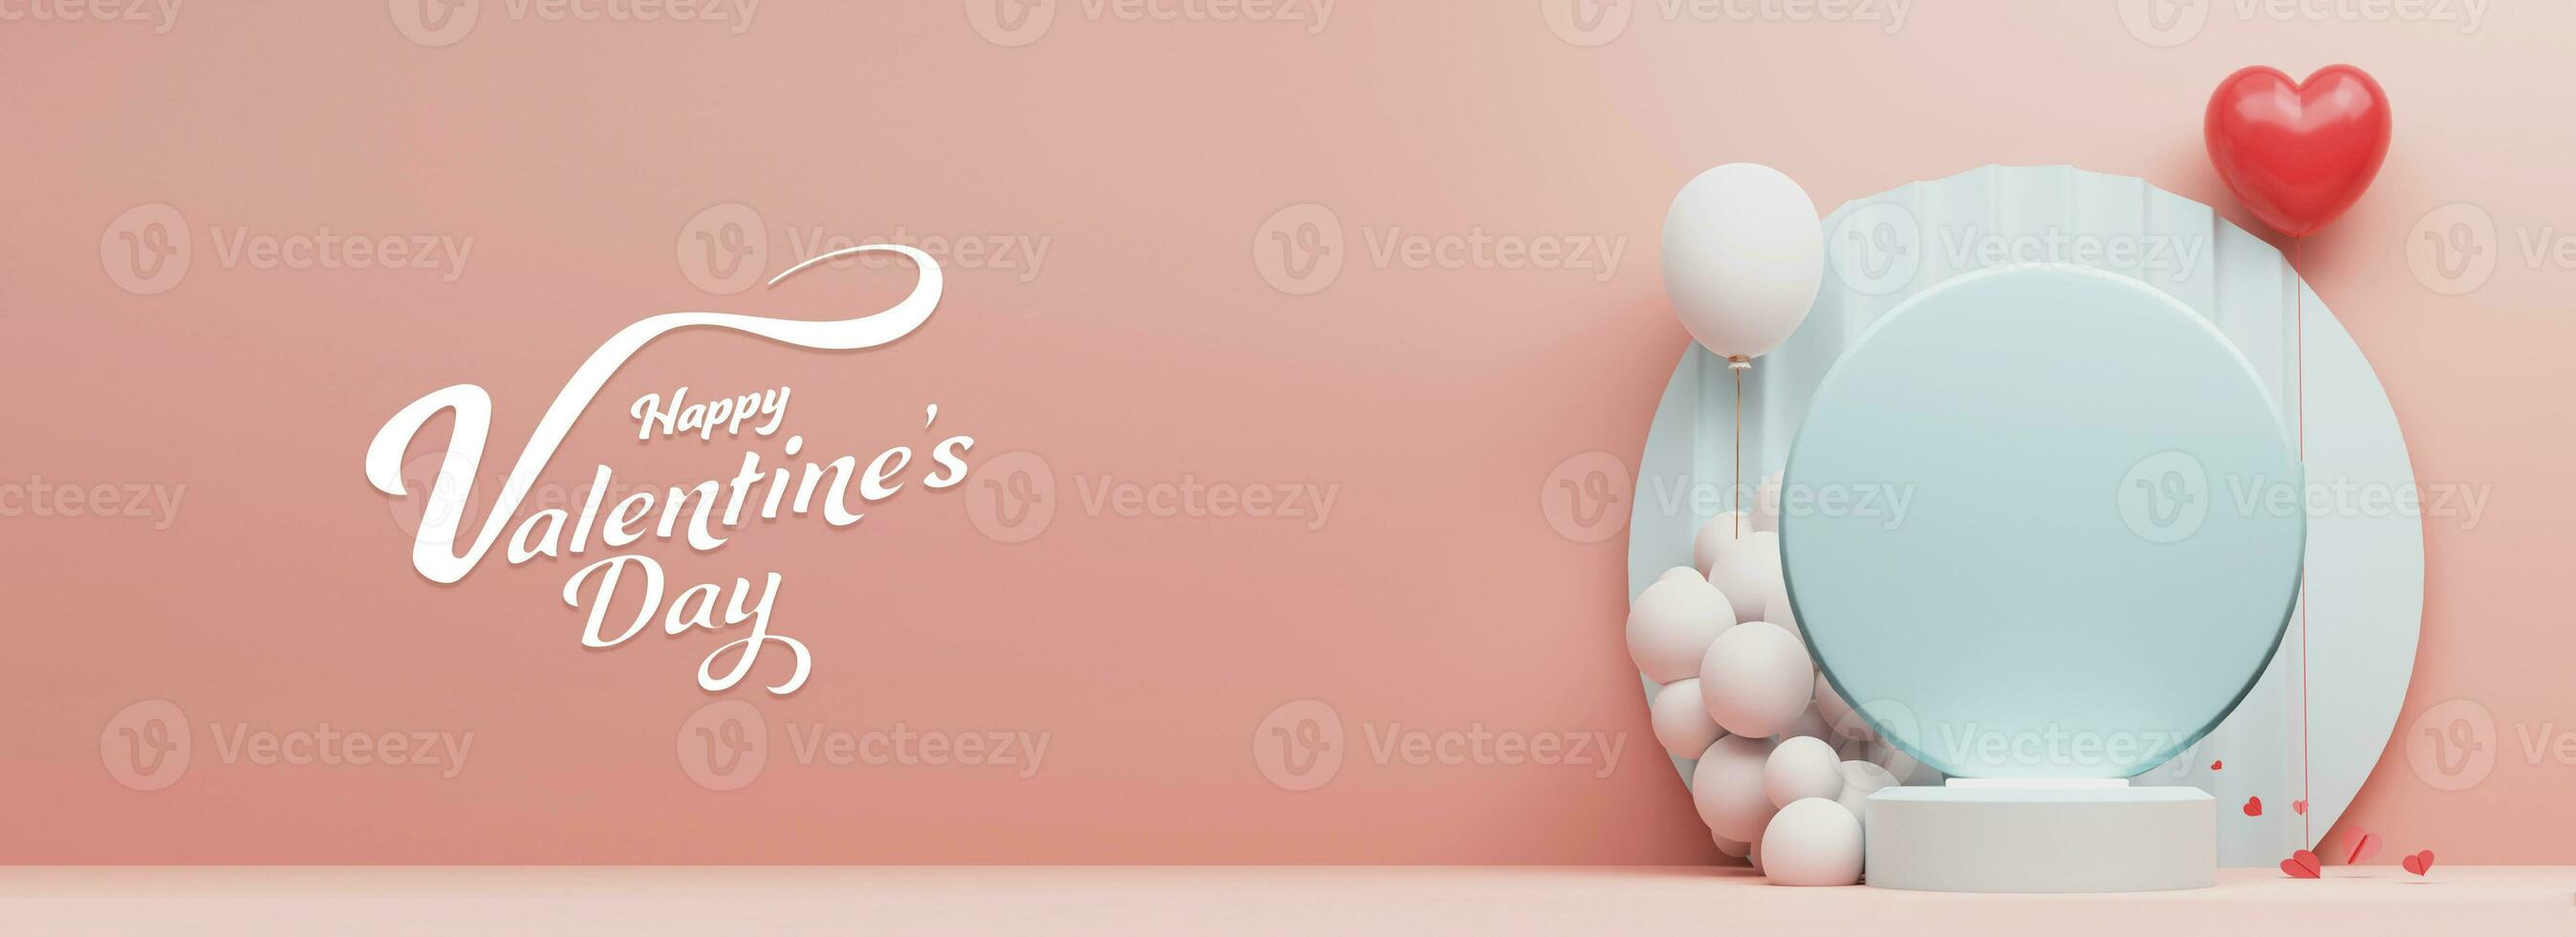 Happy Valentine's Day Calligraphy Text With 3D Render, Round Podium With Heart Shape, Balloons On Pastel Pink Background. Header Or Banner Design. photo